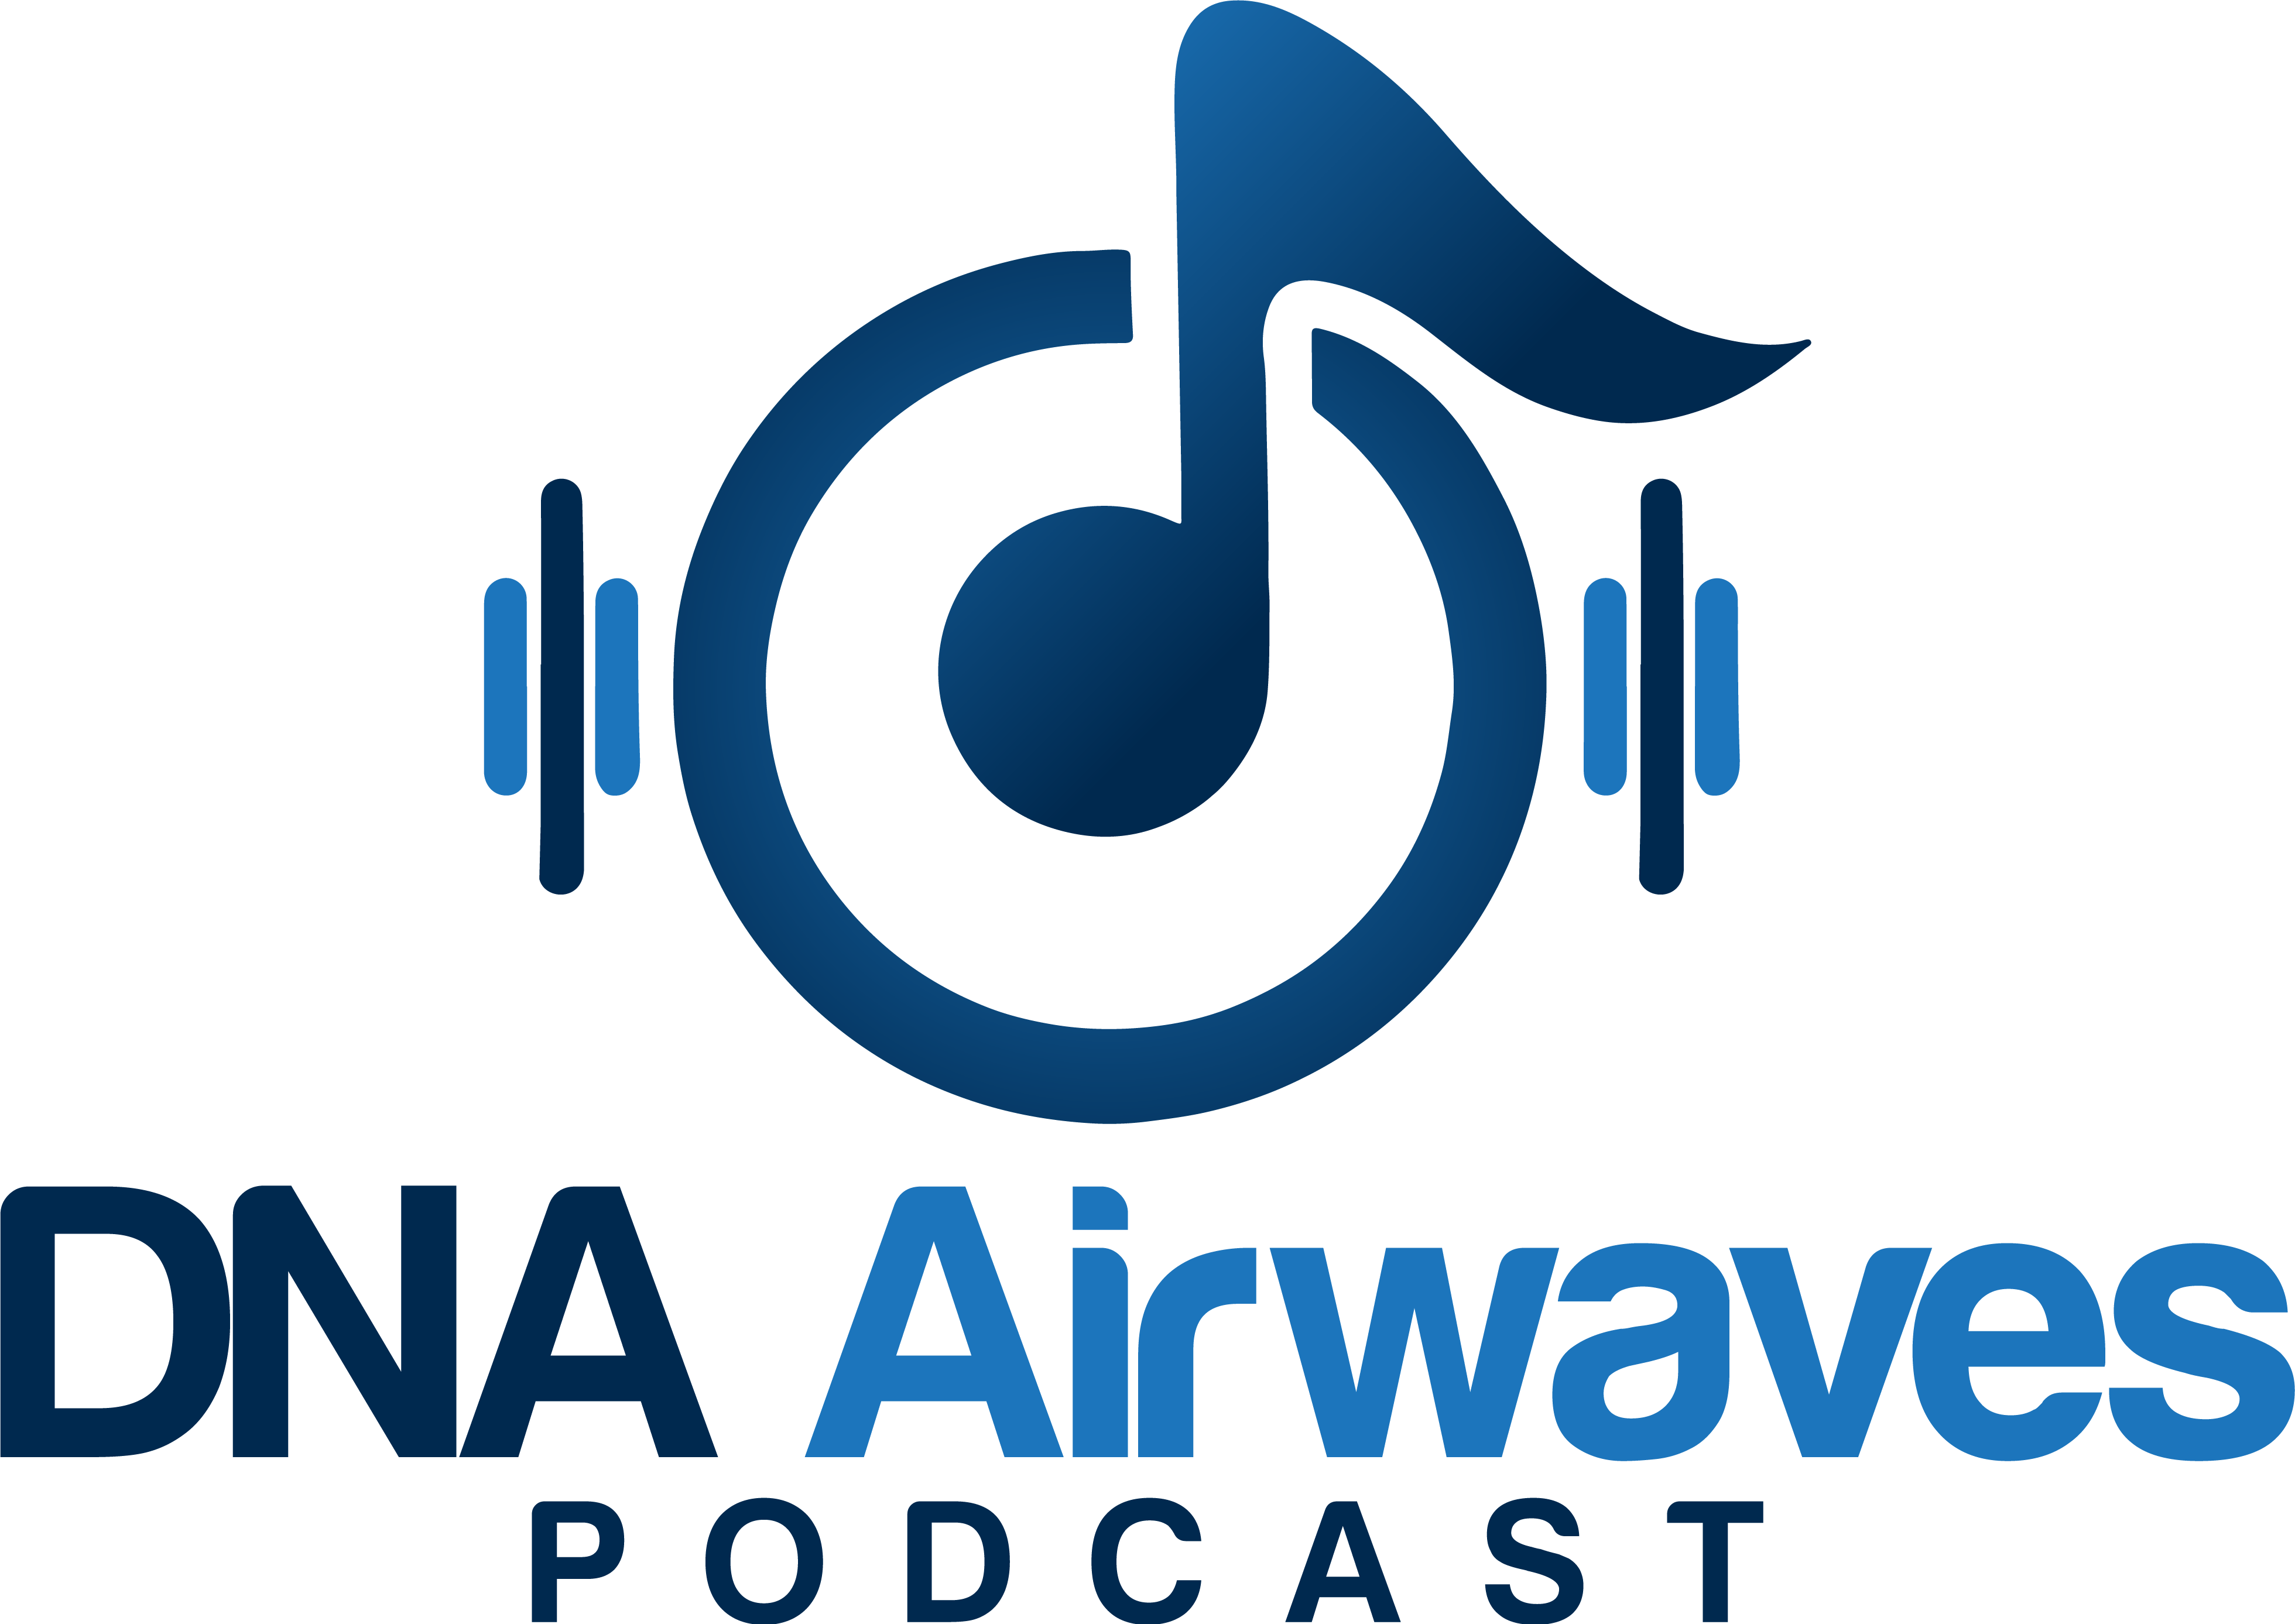 The DNA Airwaves Podcast